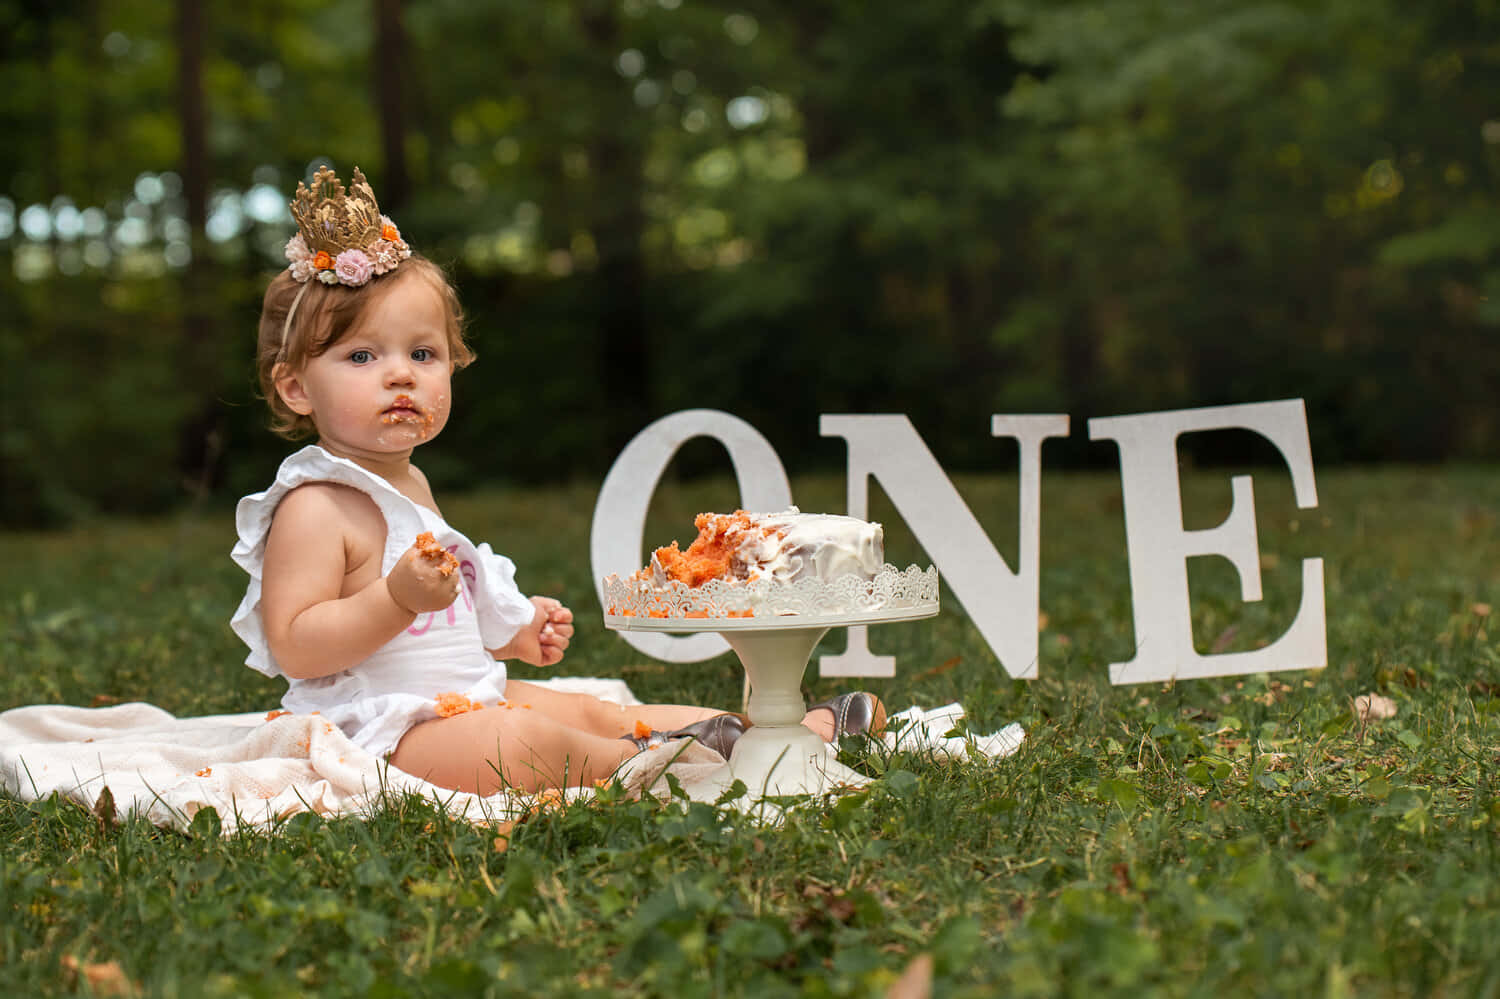 Baby On Grass With Cake Smash Picture